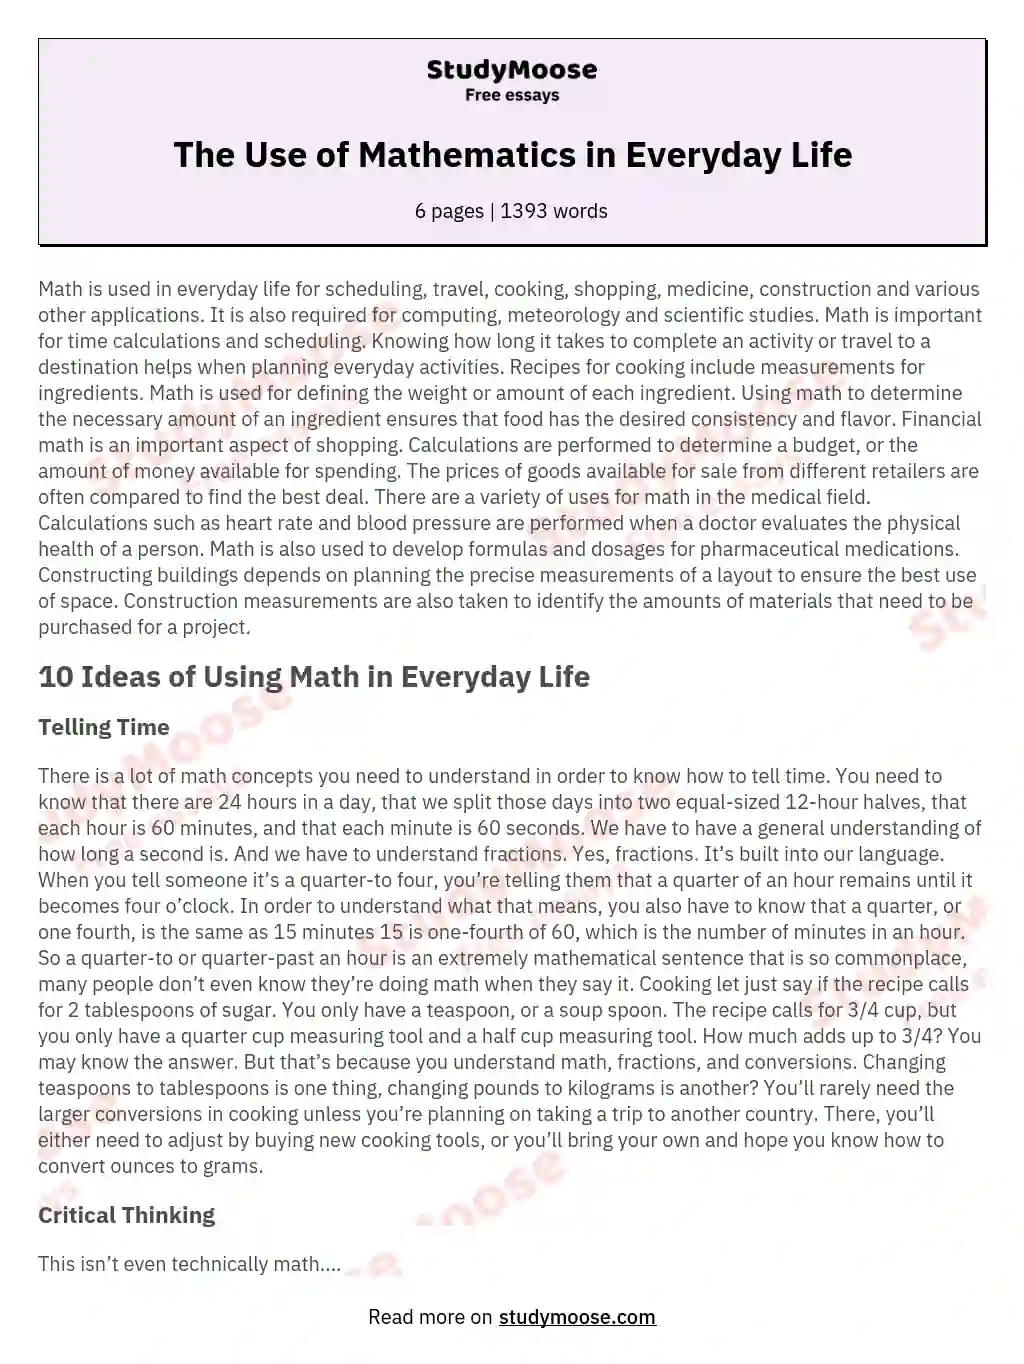 The Use of Mathematics in Everyday Life essay